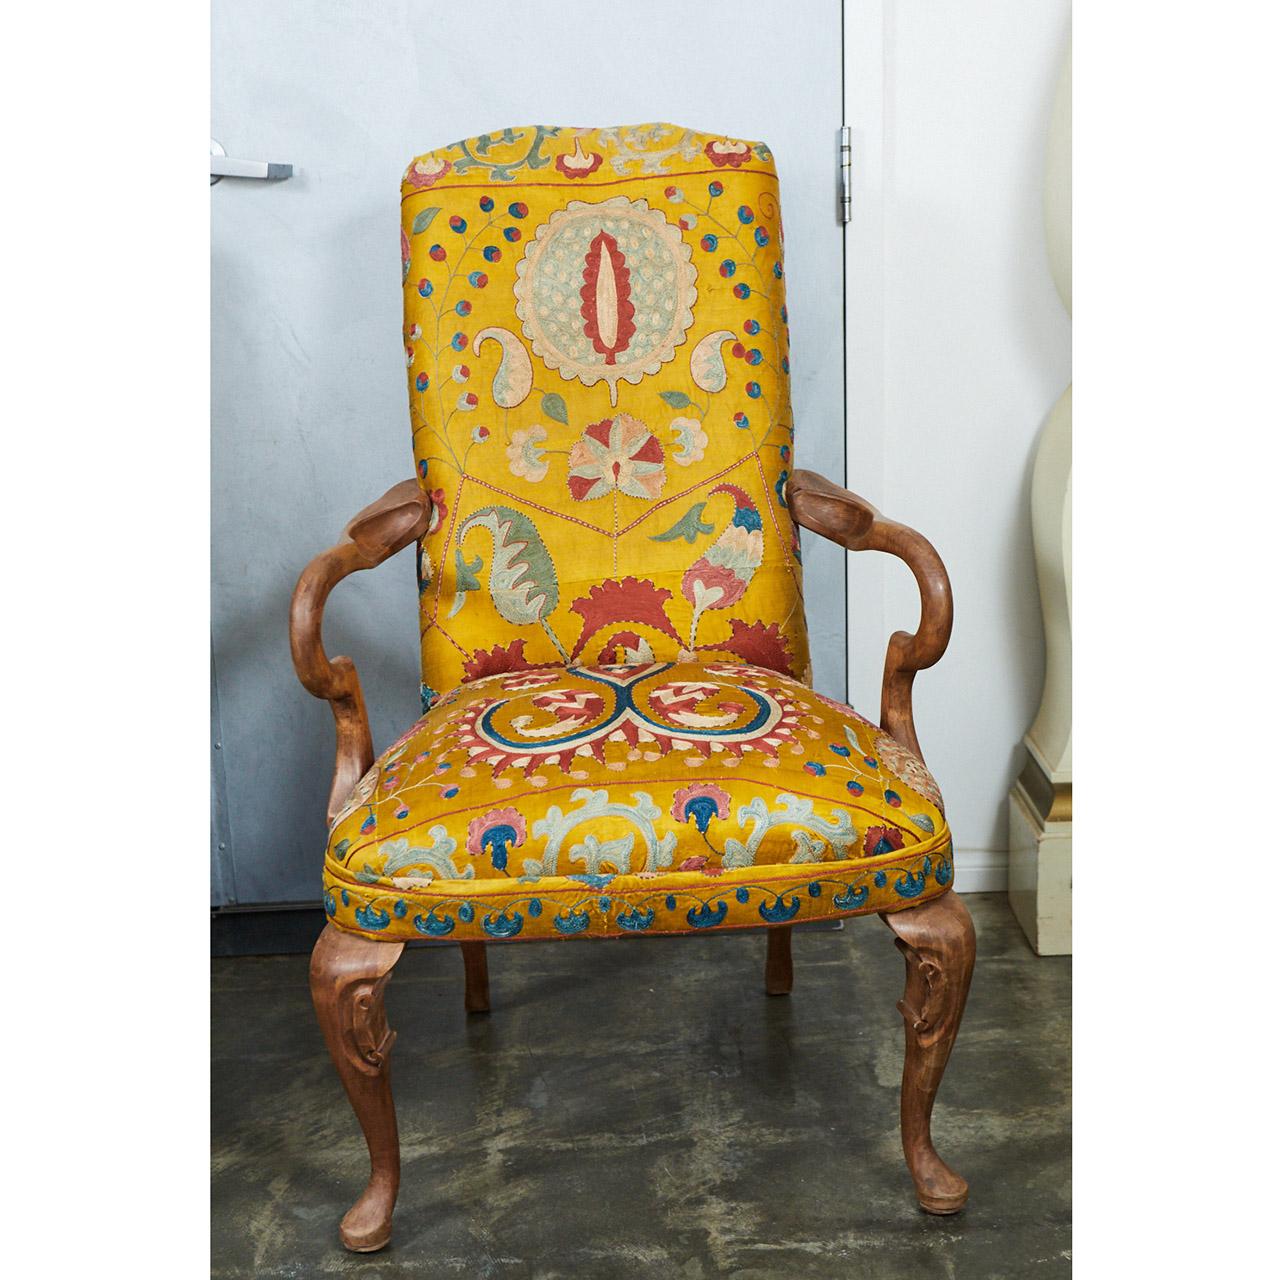 These exceptional Queen Ann style chairs have been upholstered with gorgeous embroidered golden yellow silk fabric. The frames are made from carved birchwood with delicate details. From the condition and craftsmanship we believe they were made in